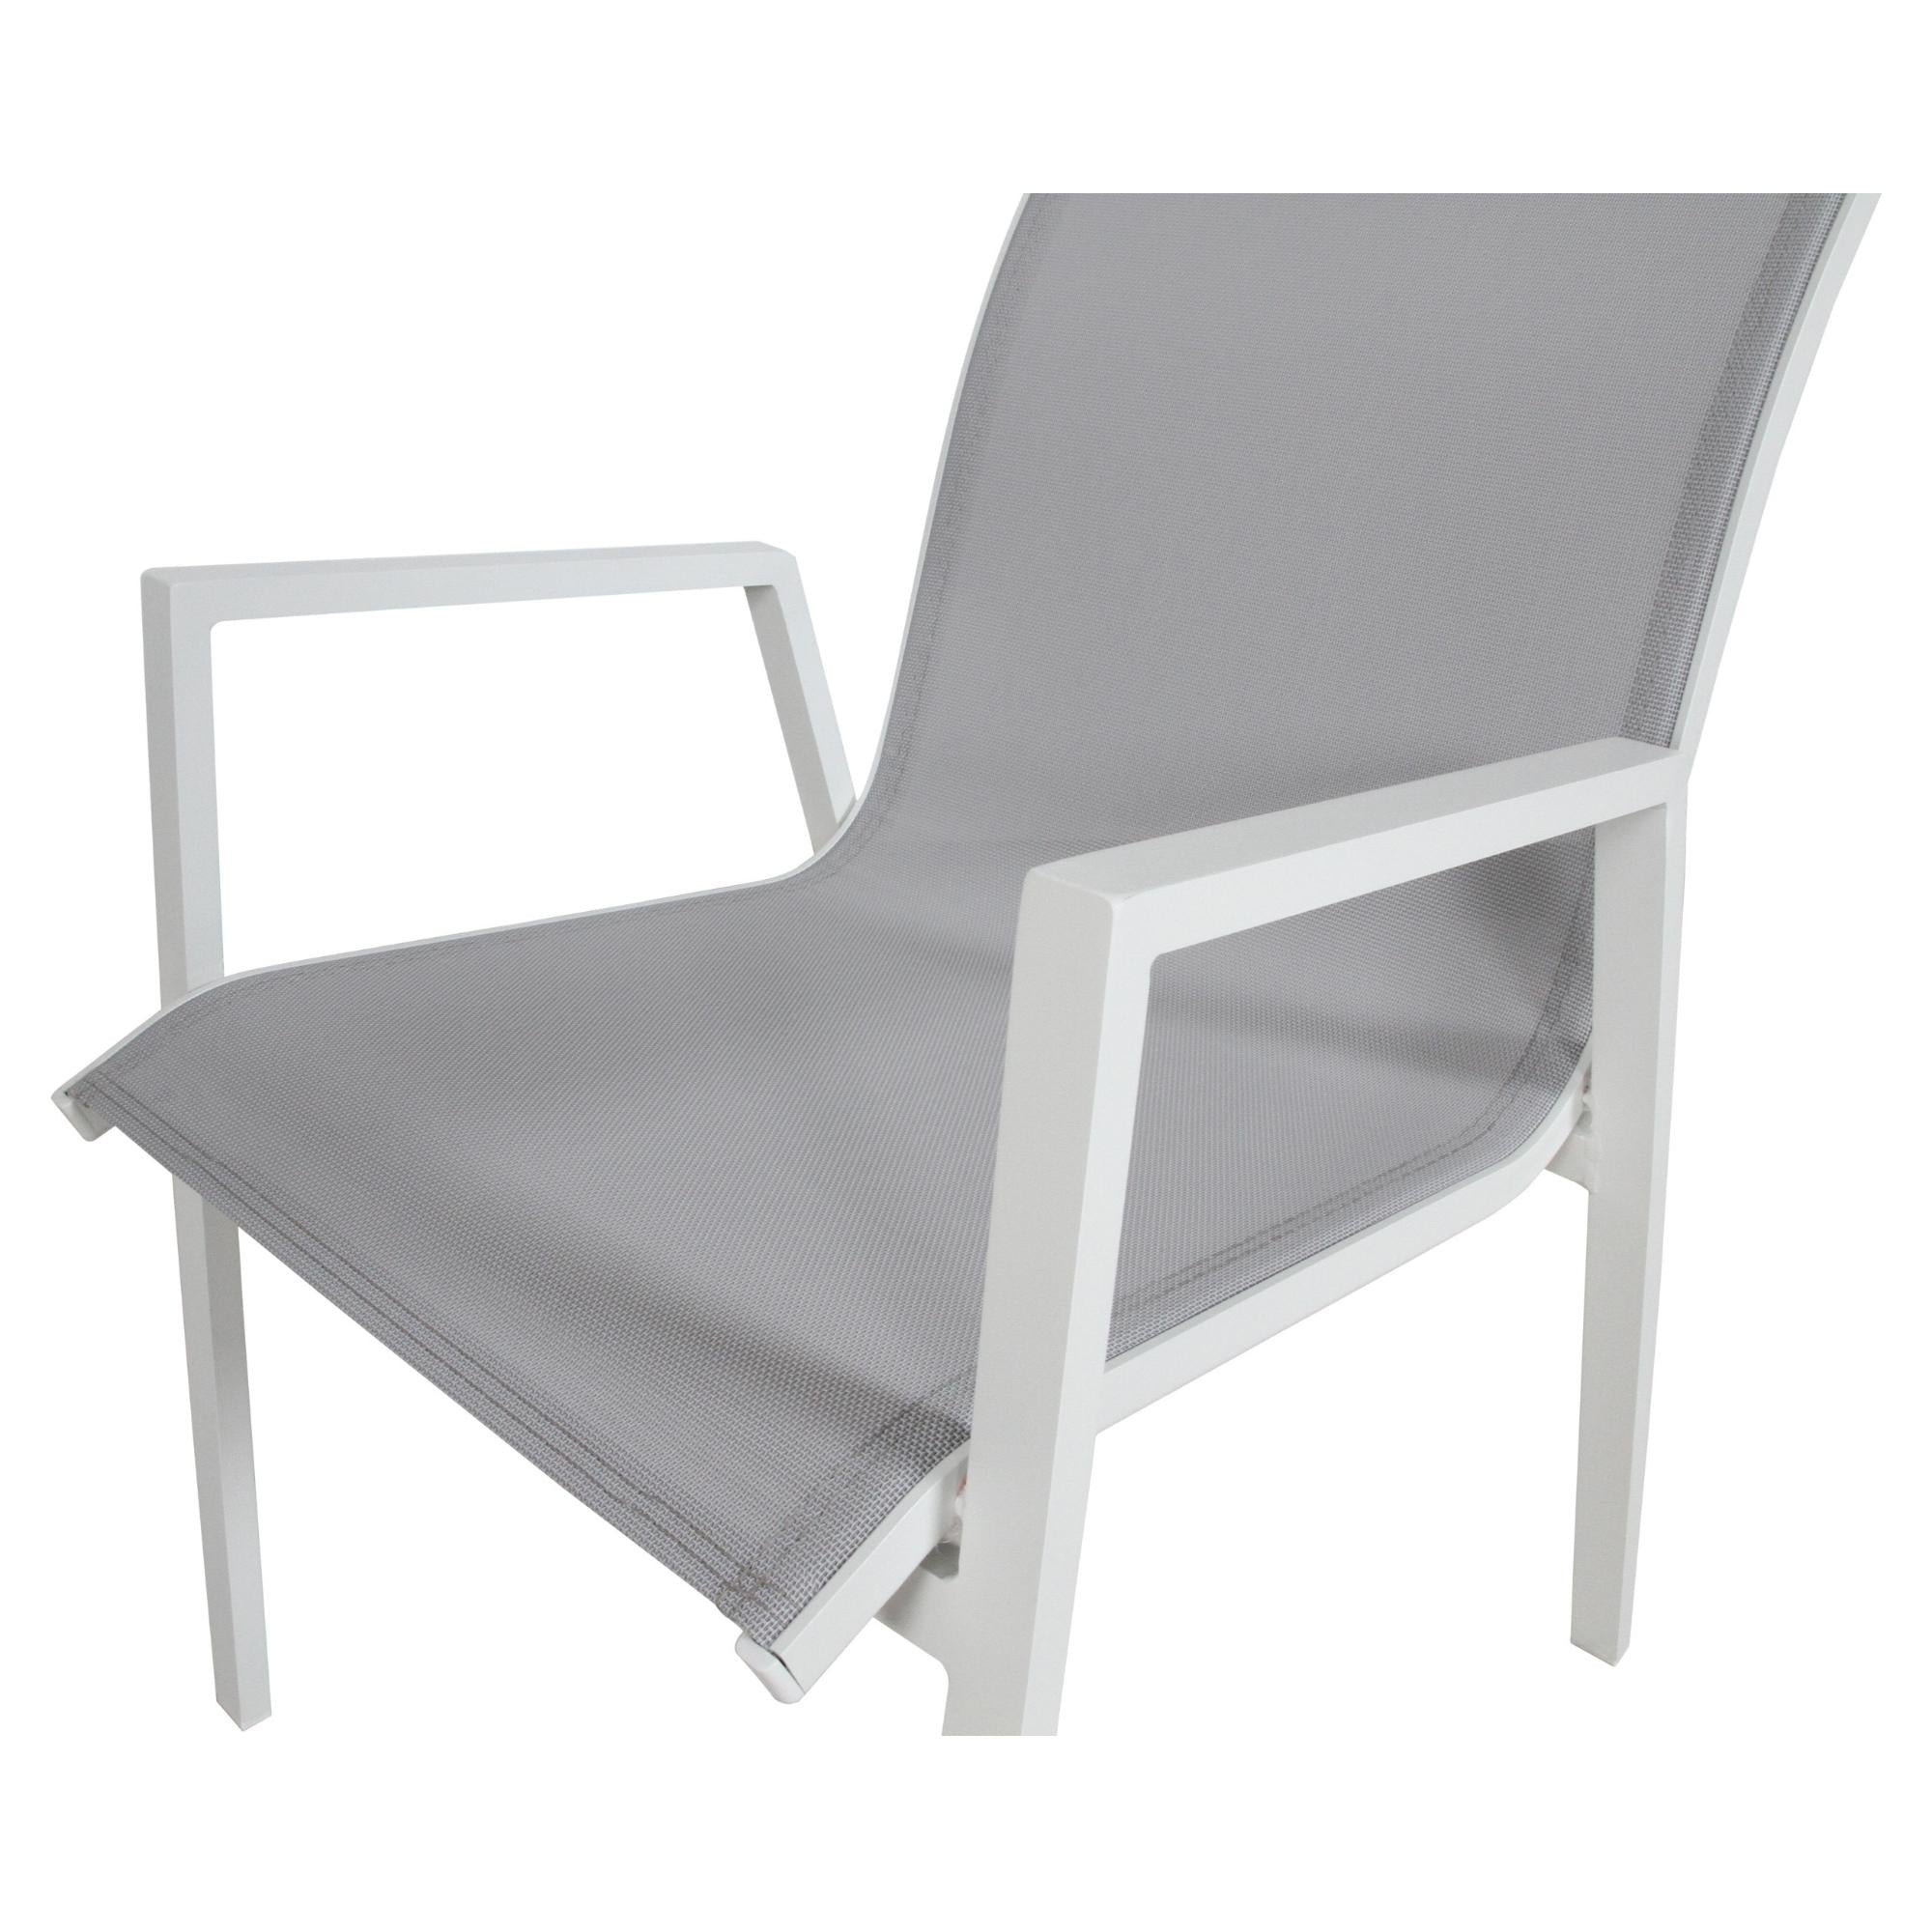 4pc Aluminium Stackable Outdoor Dining Chairs - White